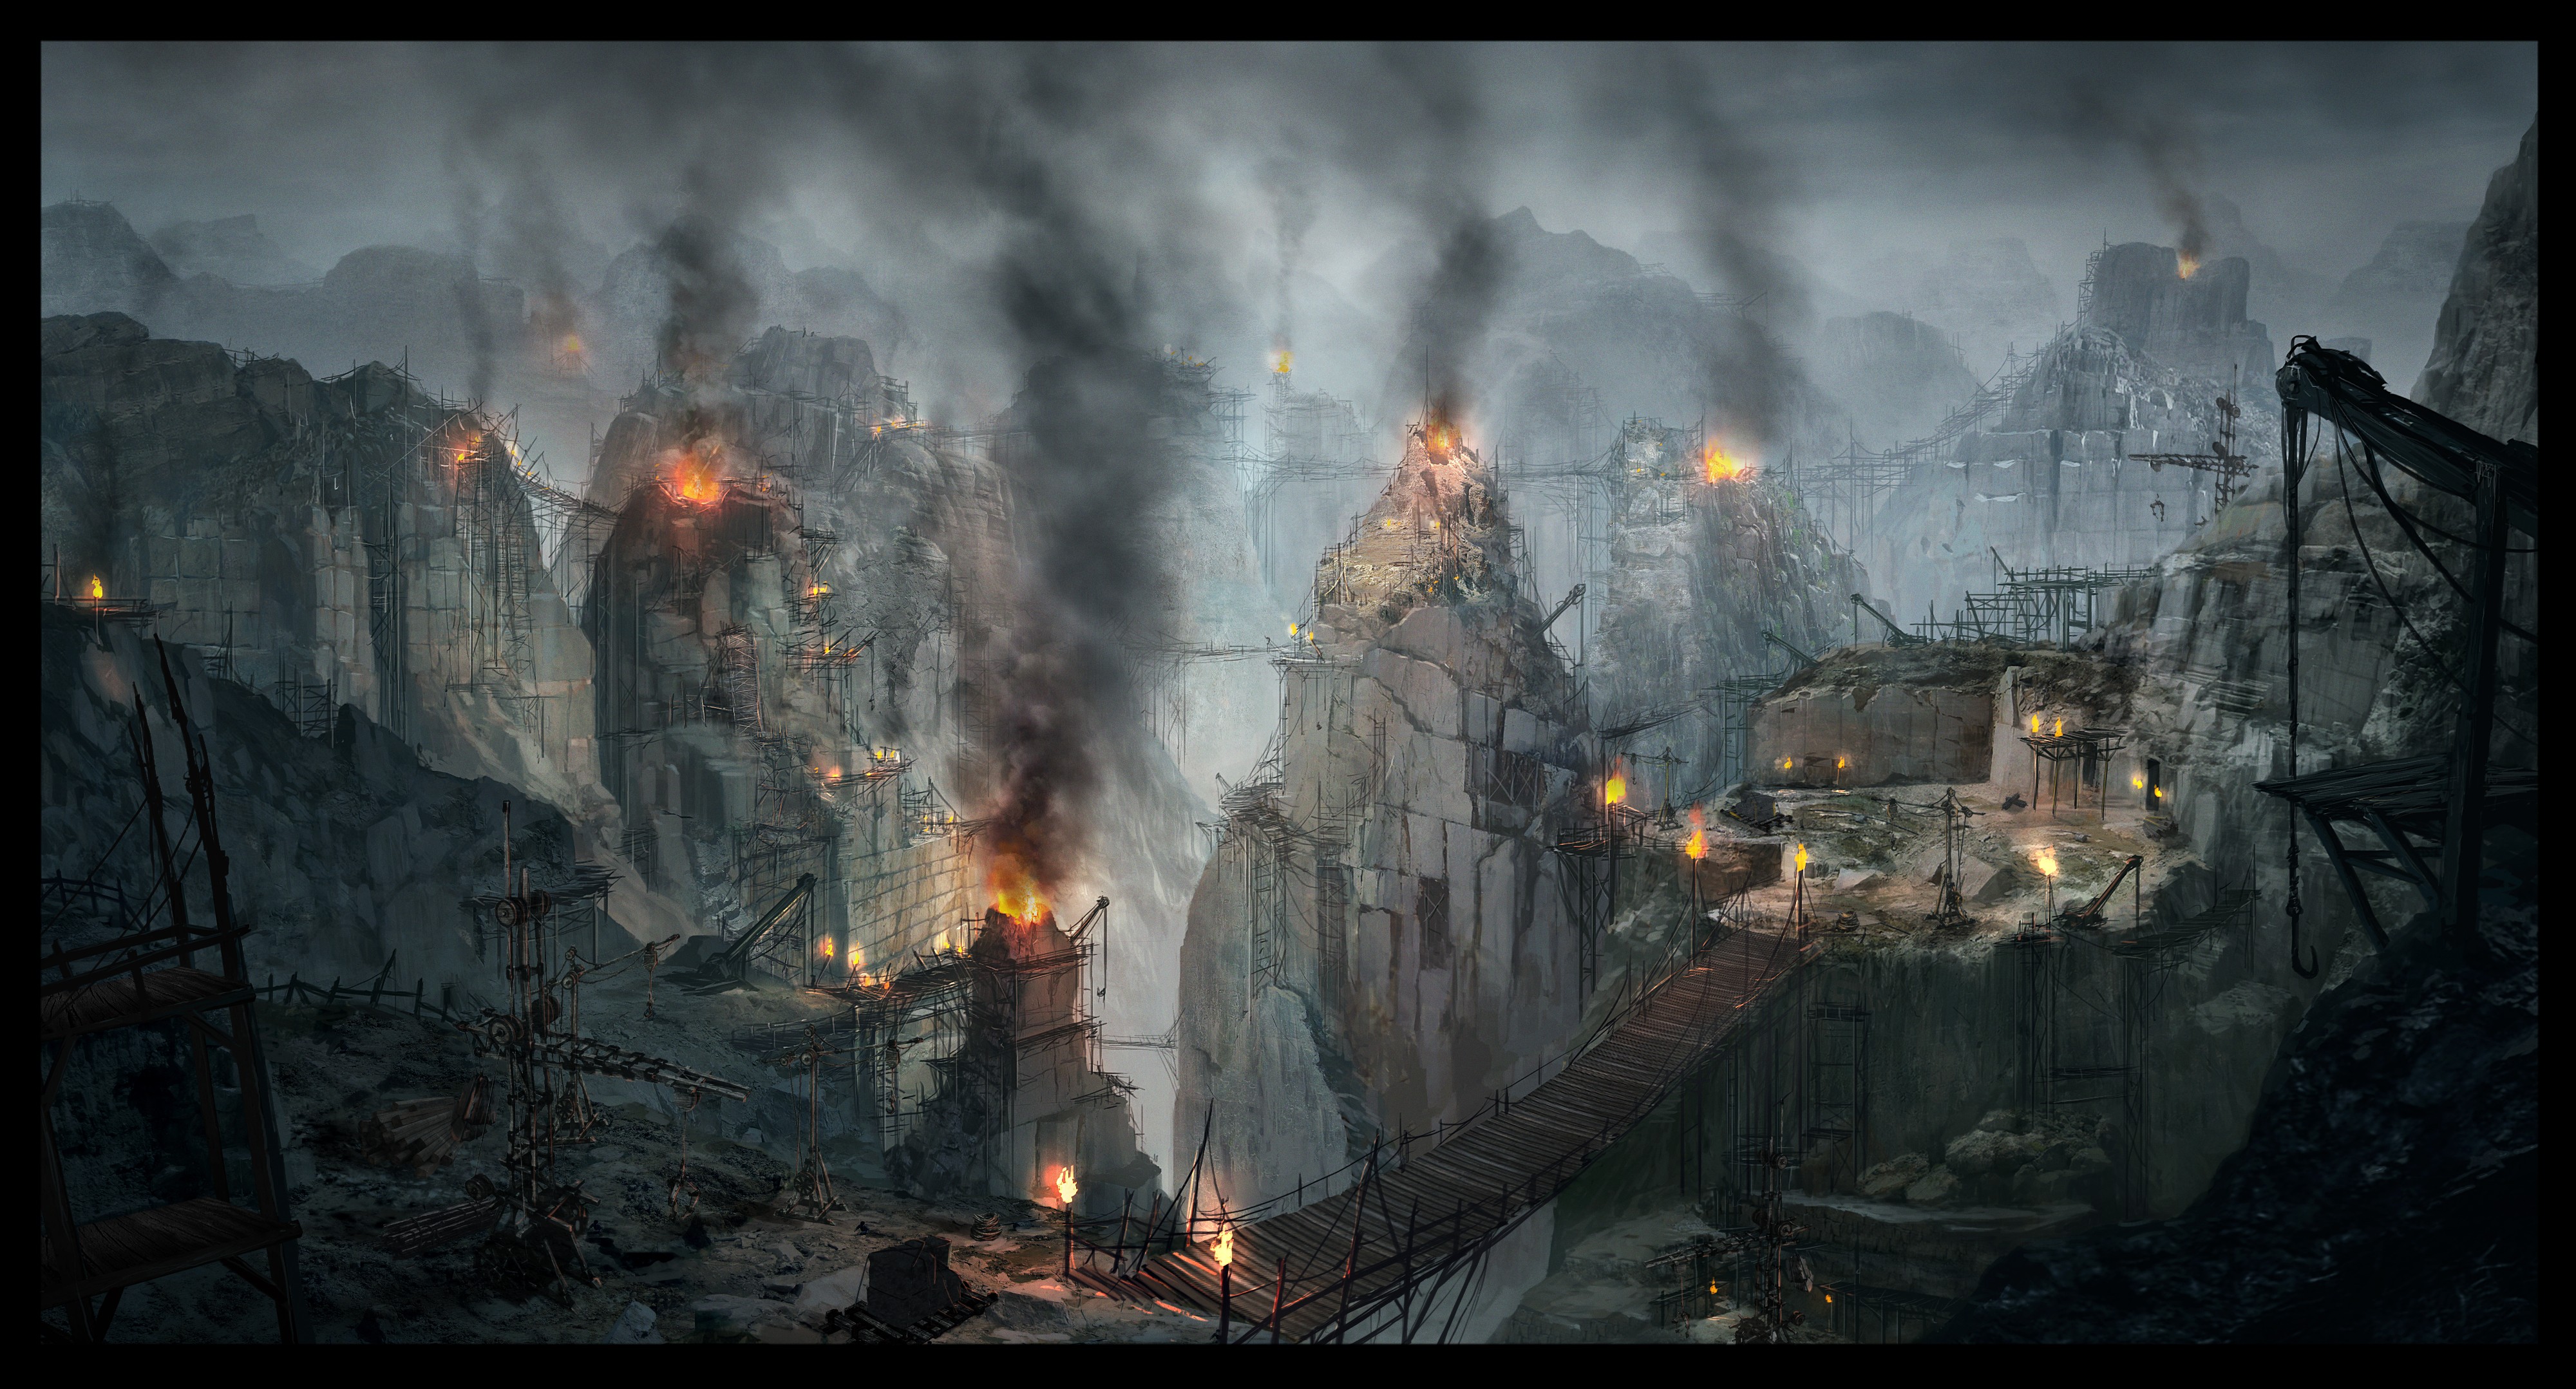 artwork, Video games, Hunted: The Demons Forge, Concept art Wallpaper